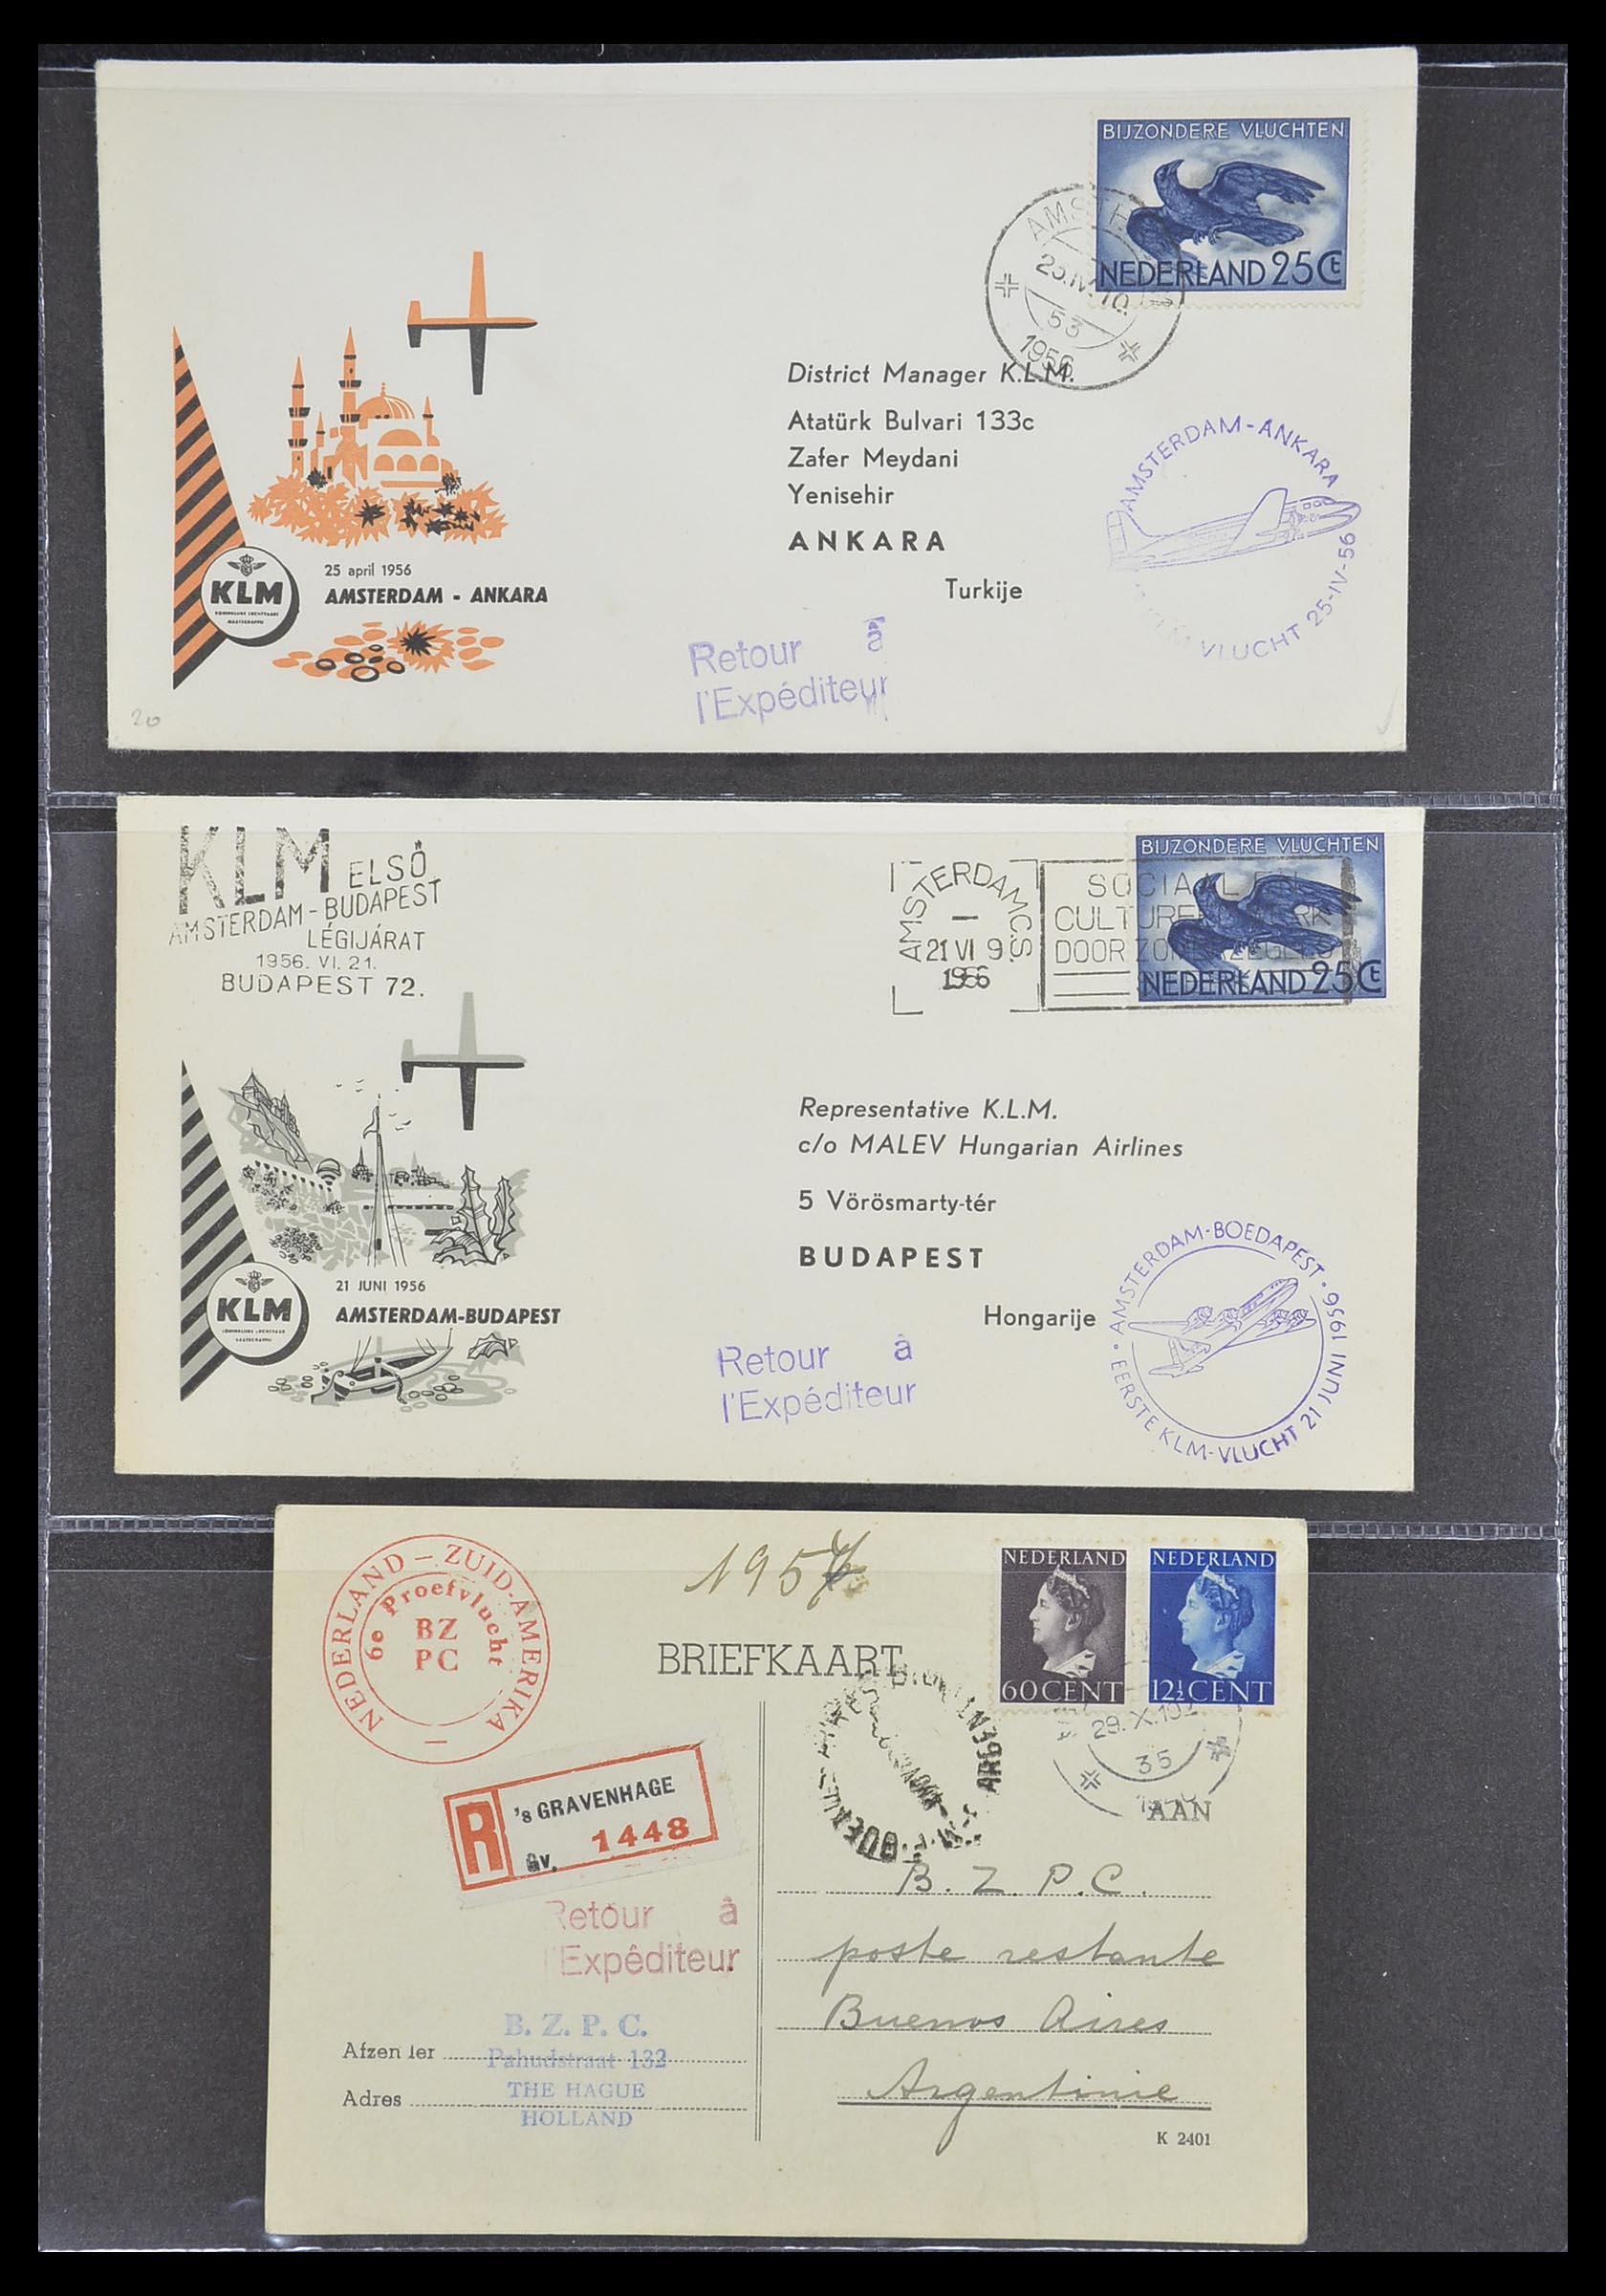 33330 073 - Stamp collection 33330 Netherlands covers 1852-1959.